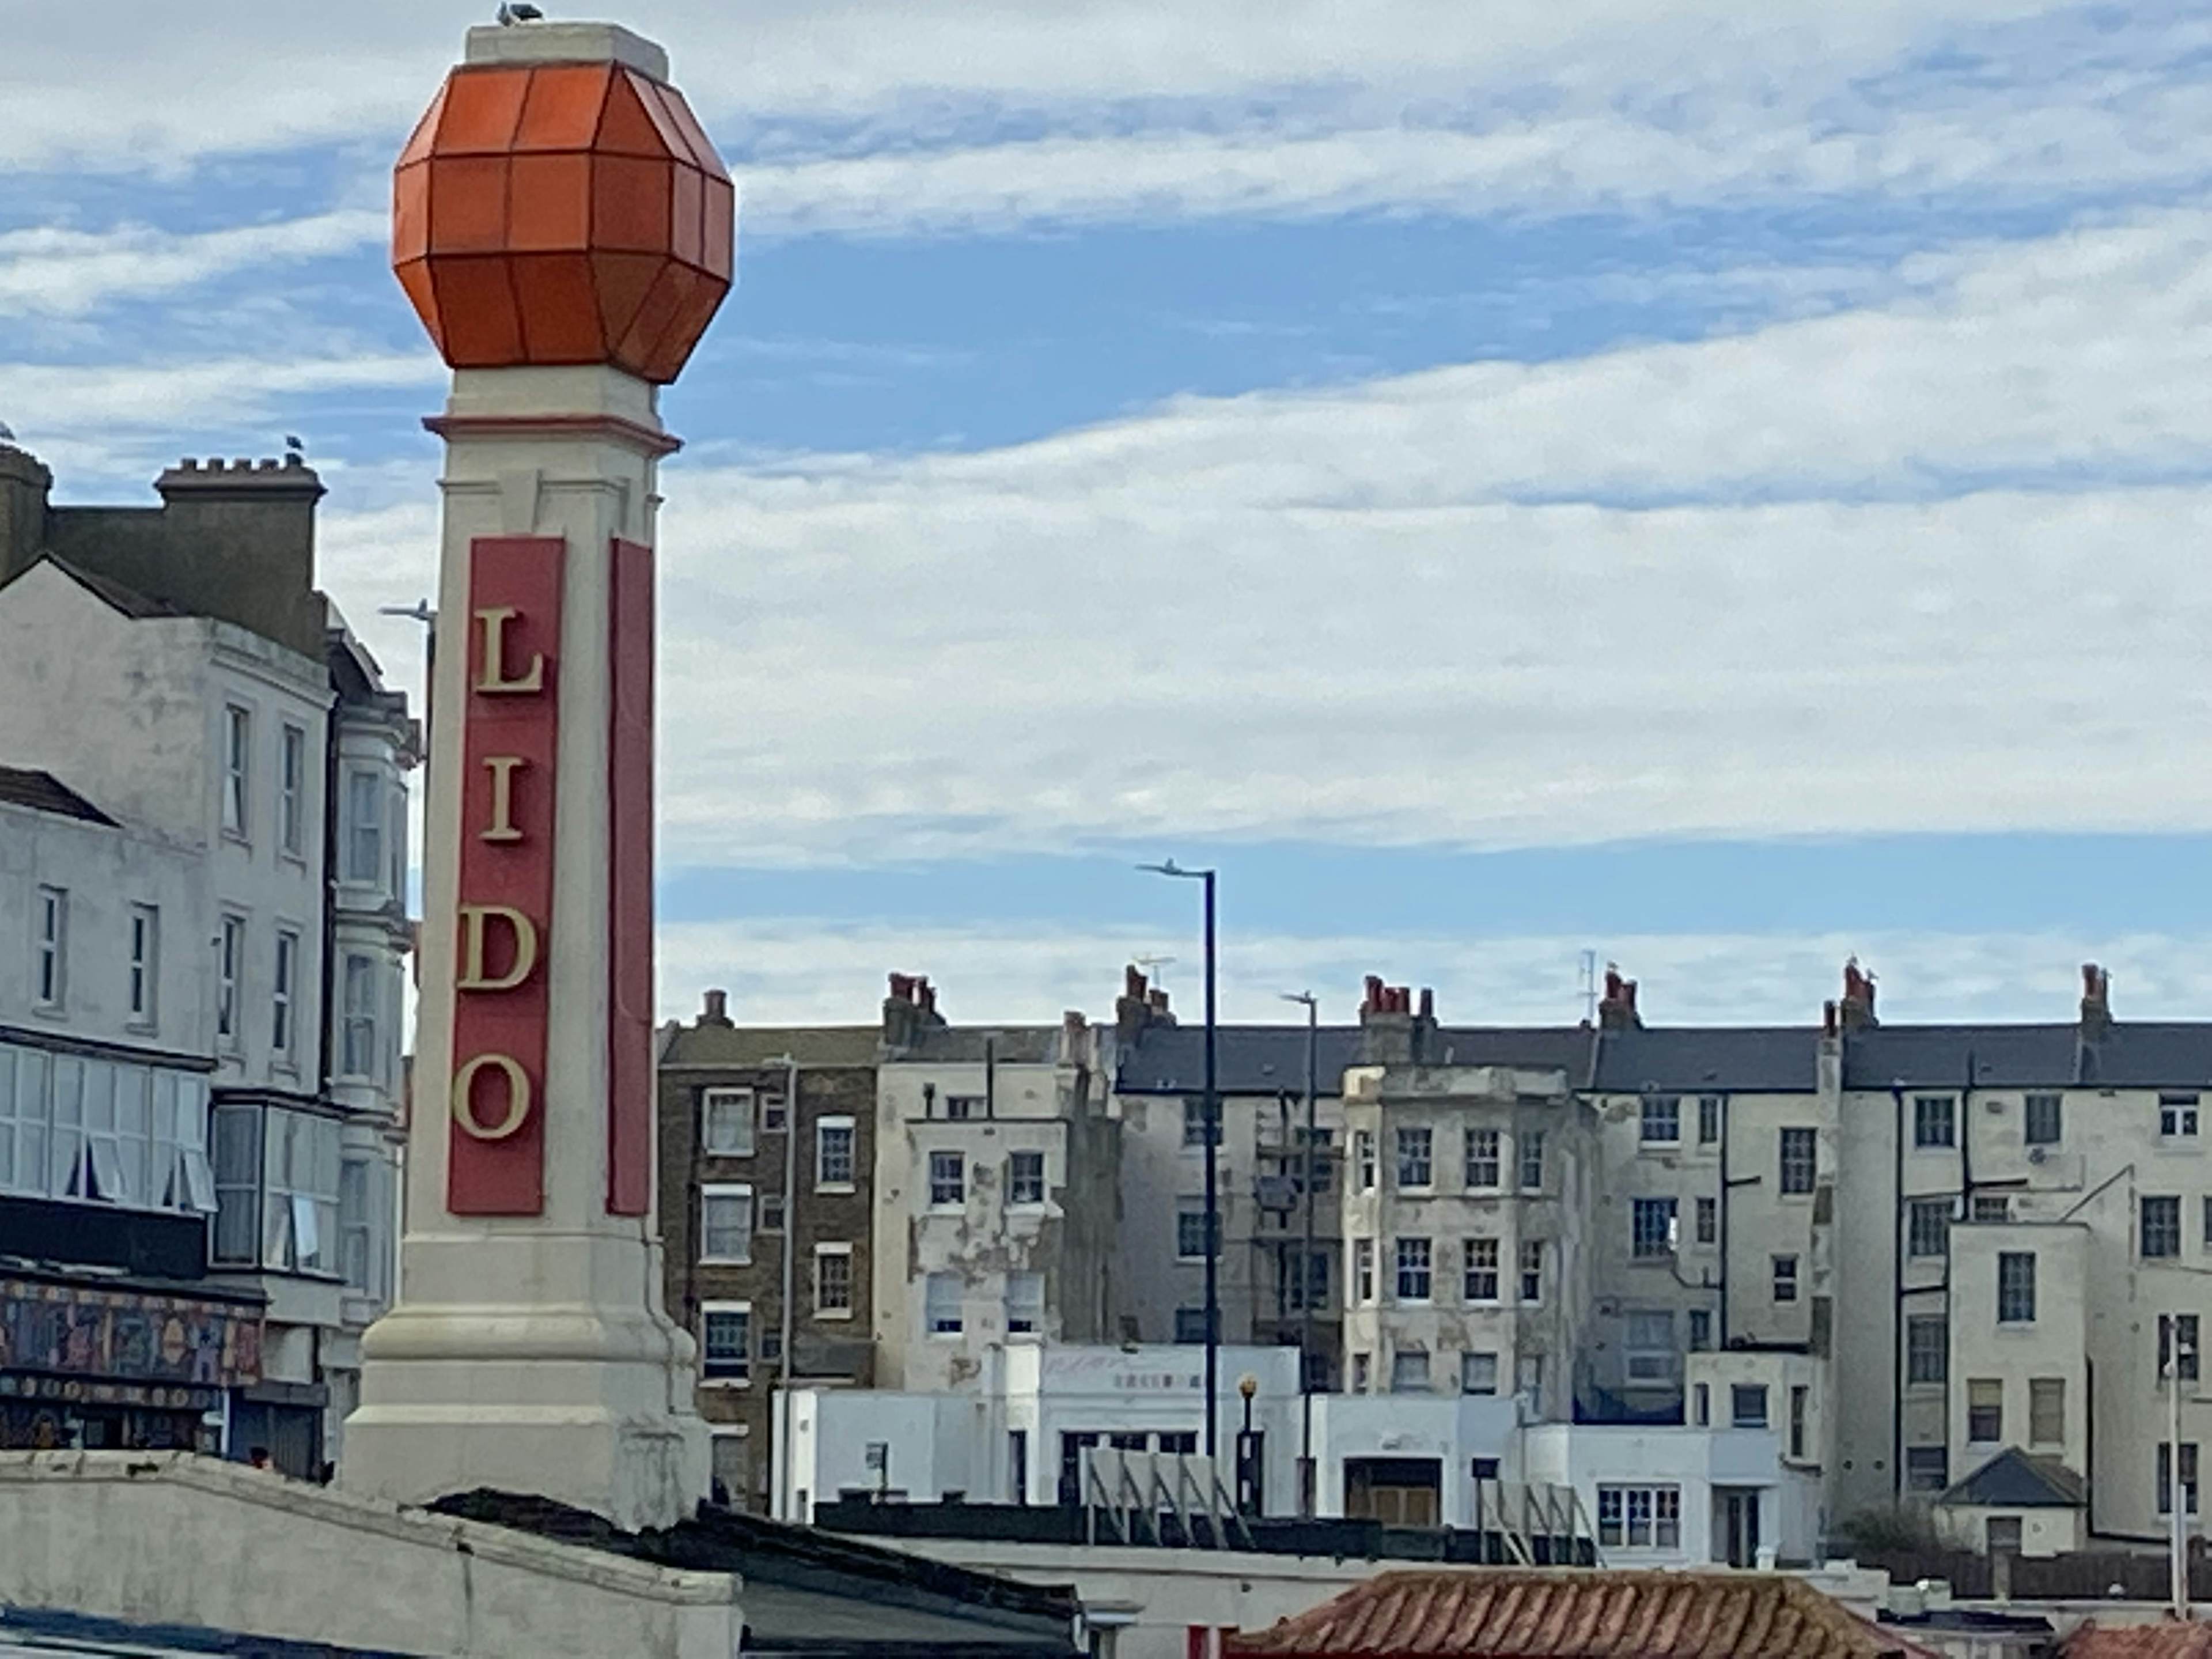 Historic Margate - Beach Boys and Bathing Belles: a Seaside Trail through Victorian Margate image